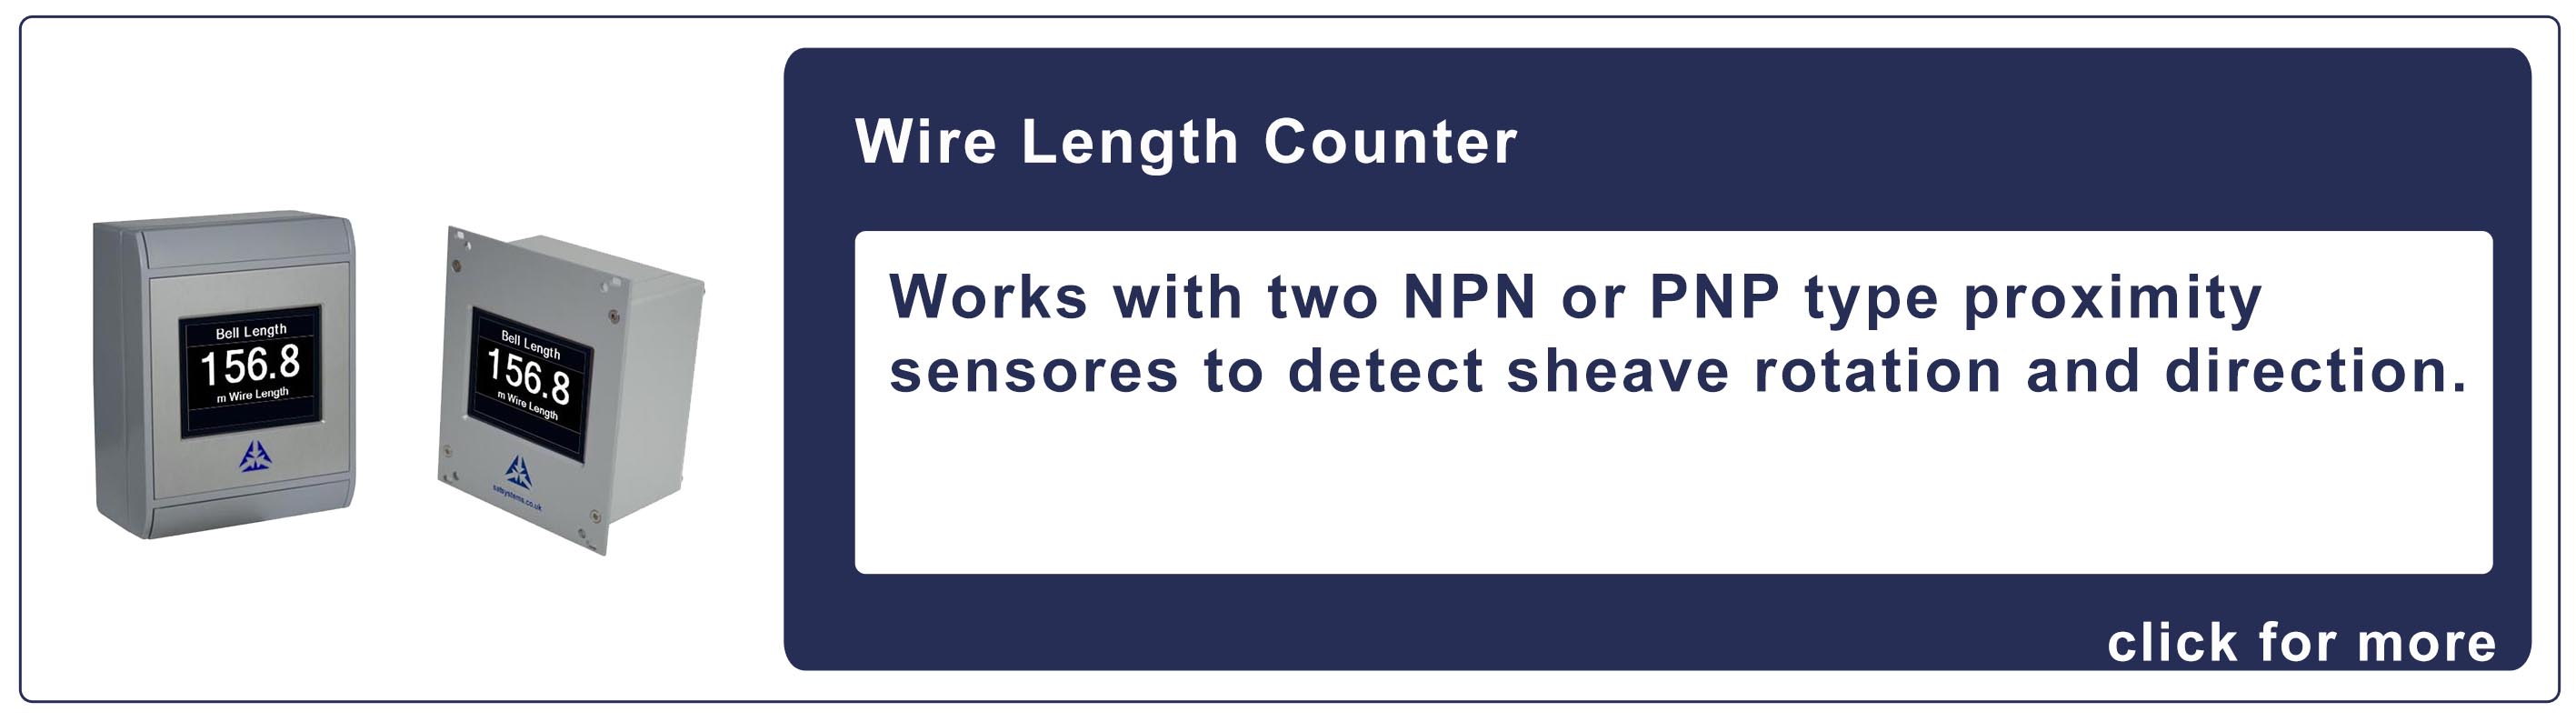 Wire-lenght-counter